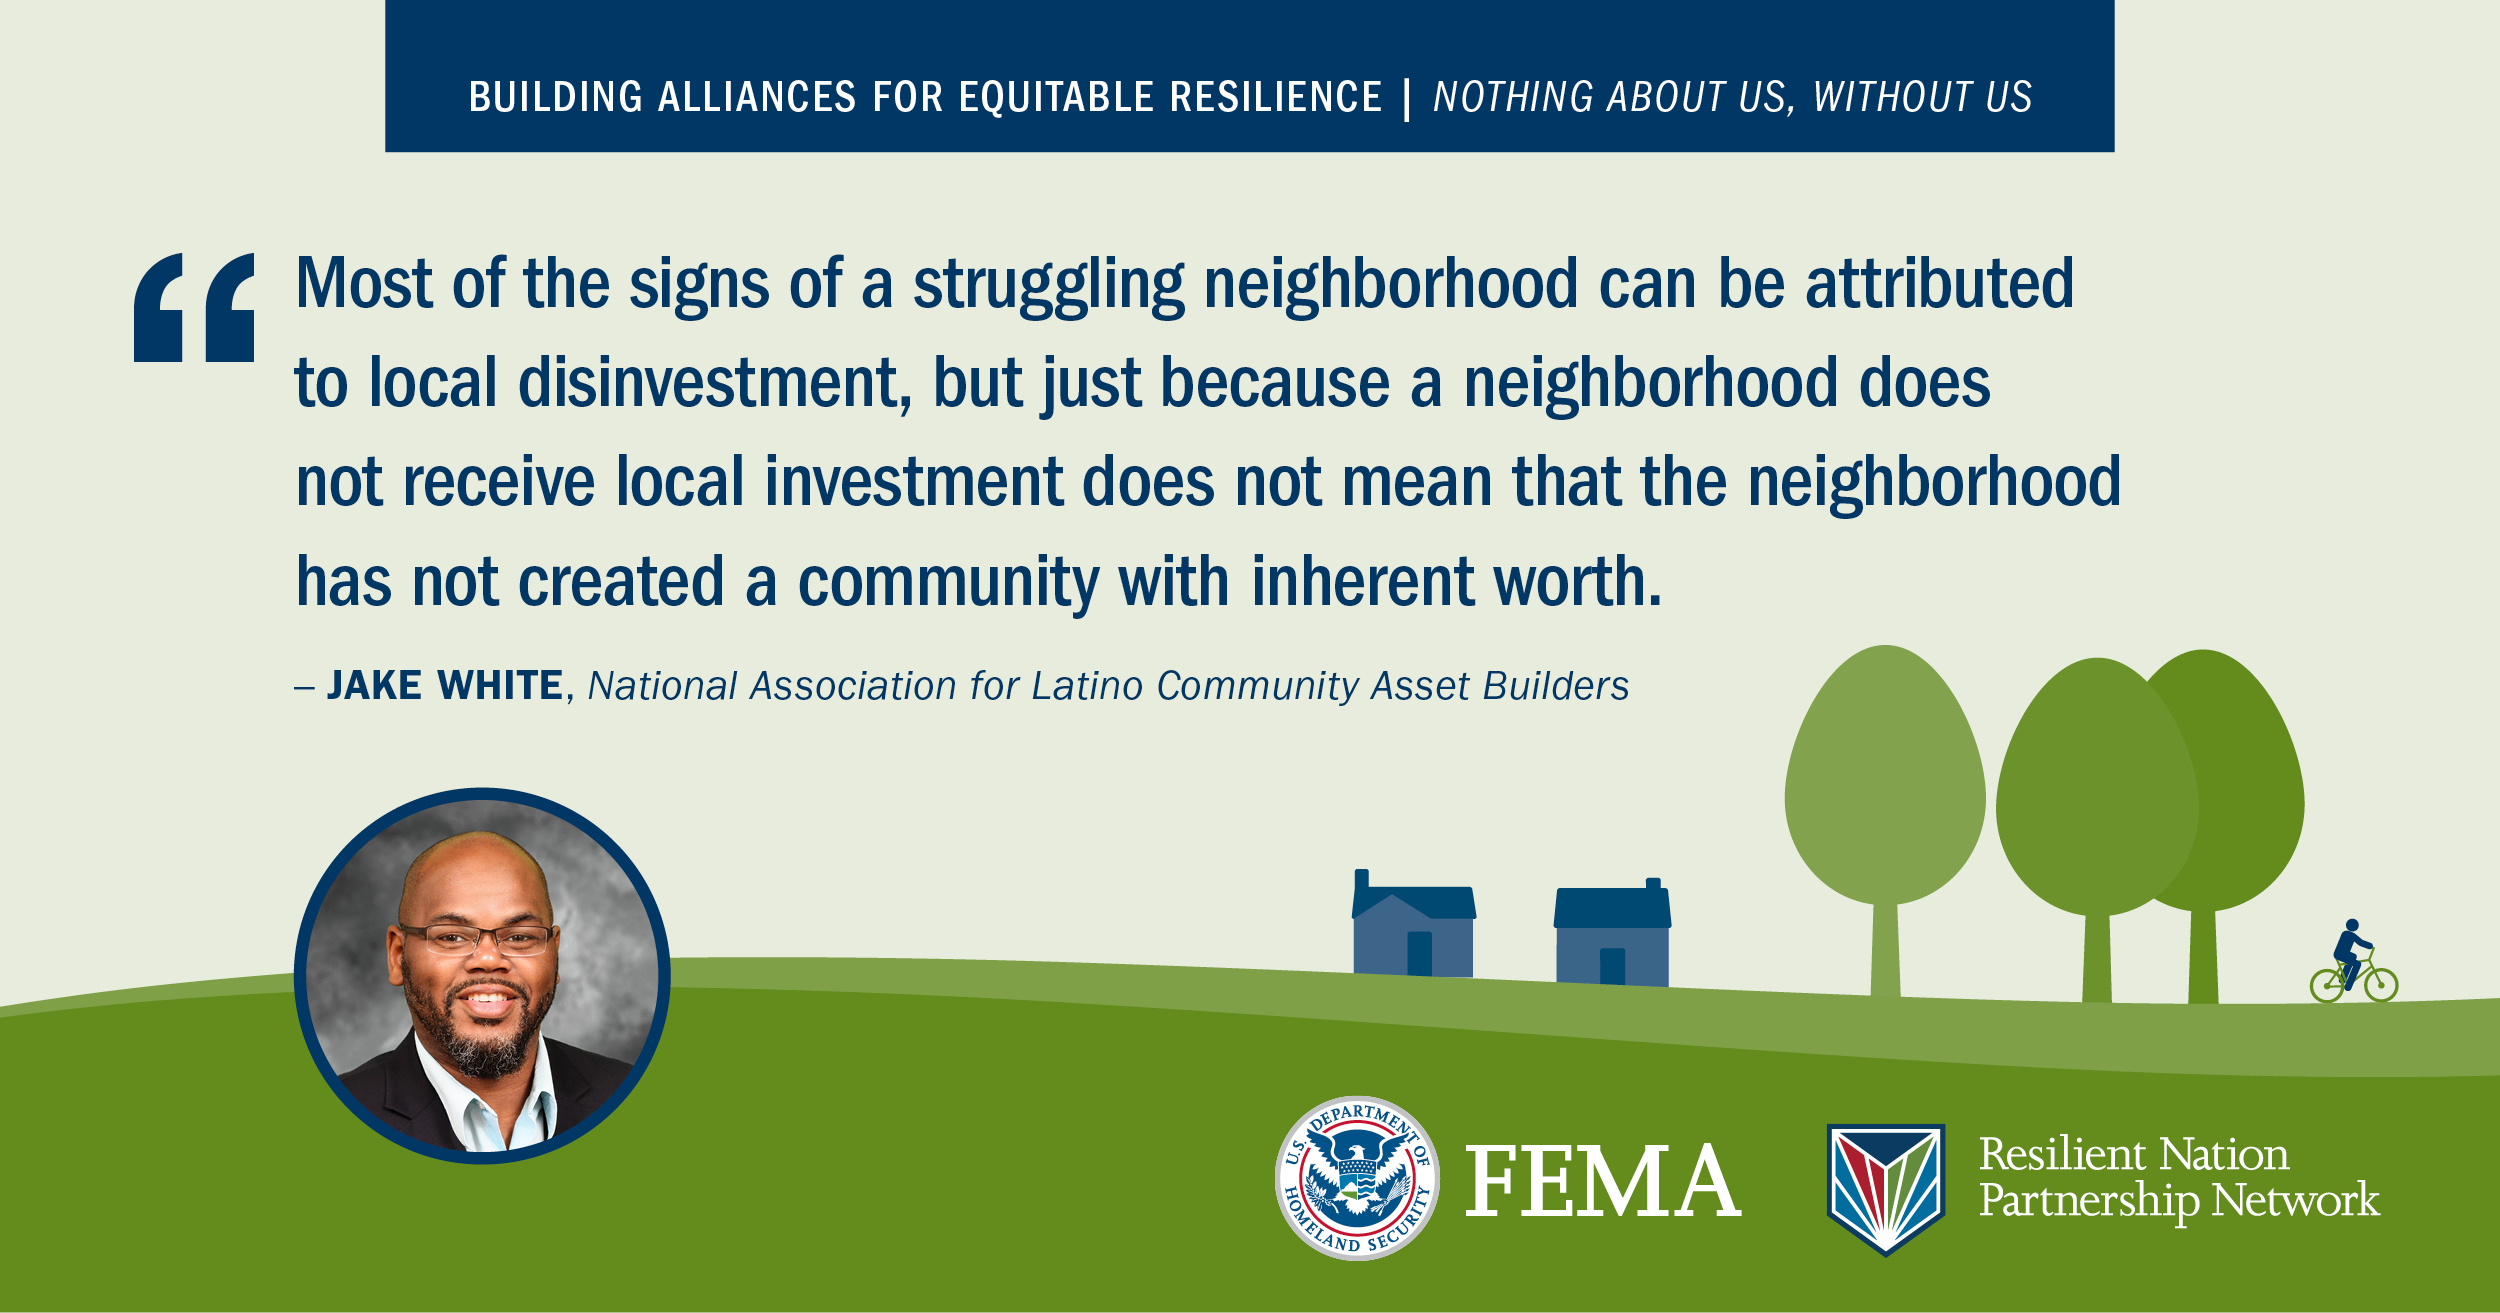 “Most of the signs of a struggling neighborhood can be attributed to local disinvestment, but just because a neighborhood does not receive local investment does not mean that the neighborhood has not created a community with inherent worth.” -Jake White, National Association for Latino Community Asset Builders